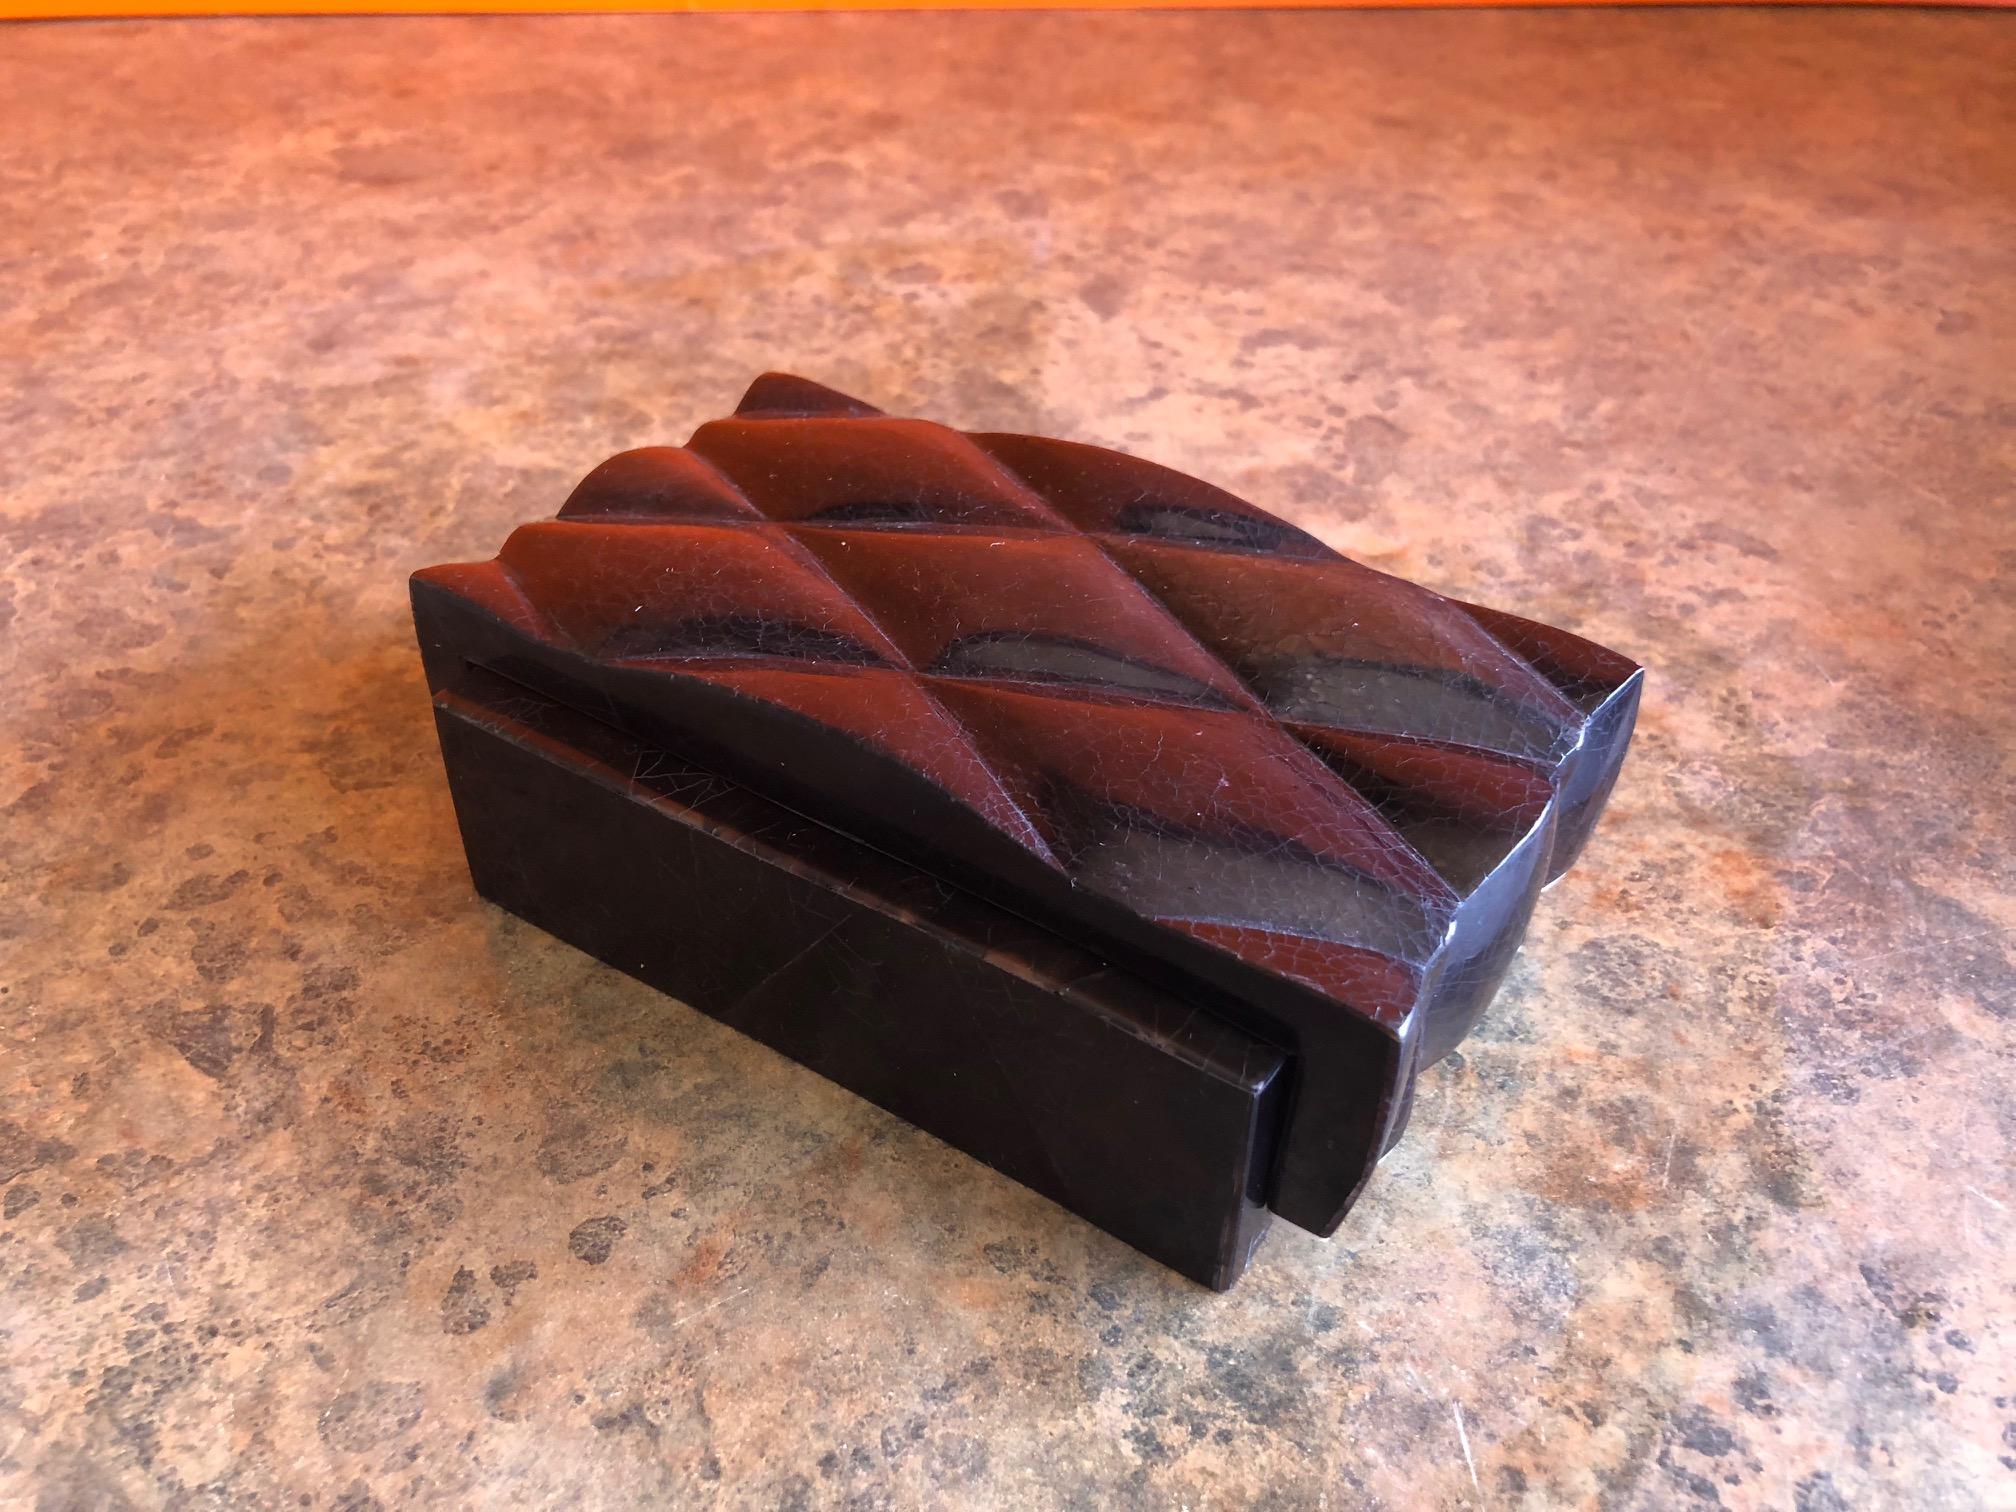 Gorgeous inlaid black shell and bone decorative trinket box by A&Y Augousti of Paris, circa 1990s. The box is made of wood with a intricate diamond pattern shell overlay and is in excellent condition.  #503